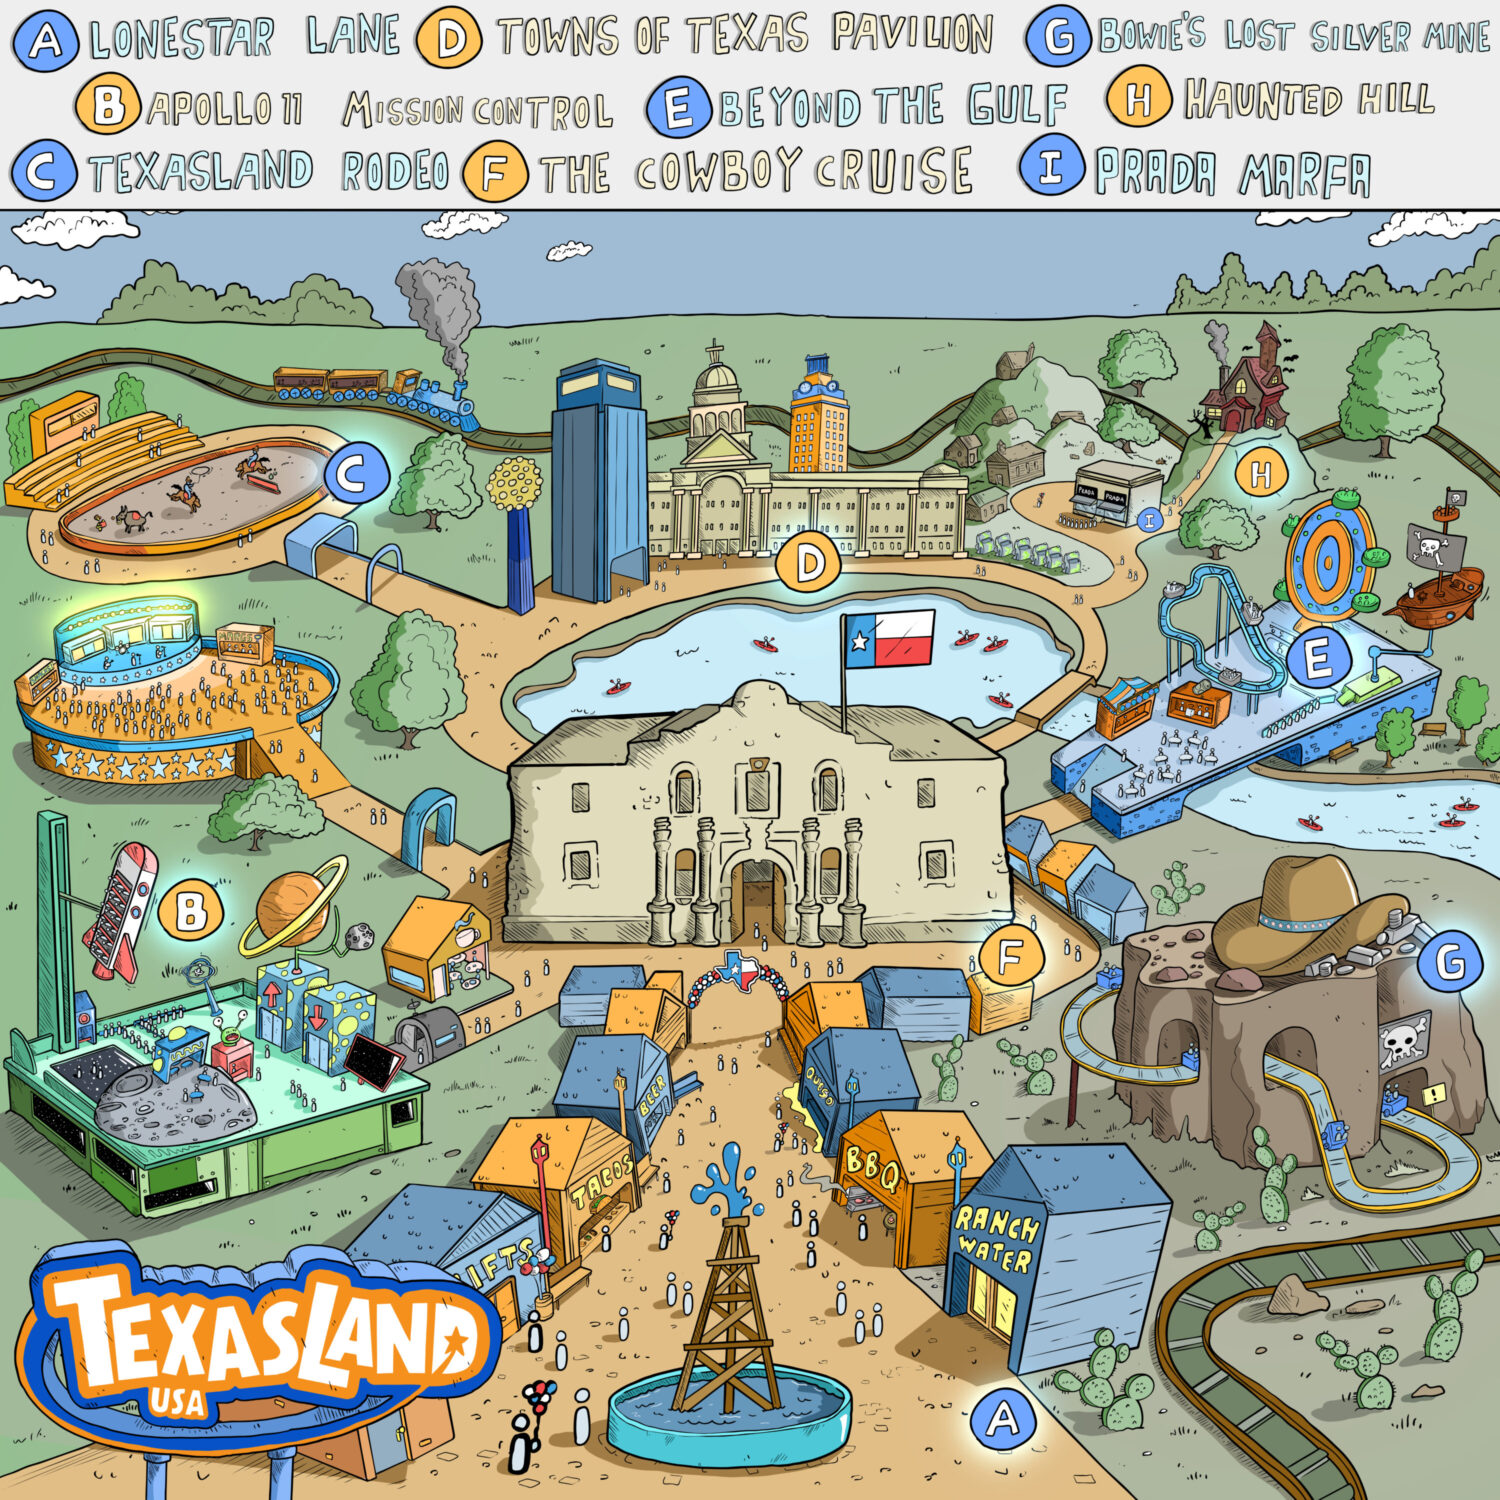 TexasLand' is a big idea for a theme park that could be coming to